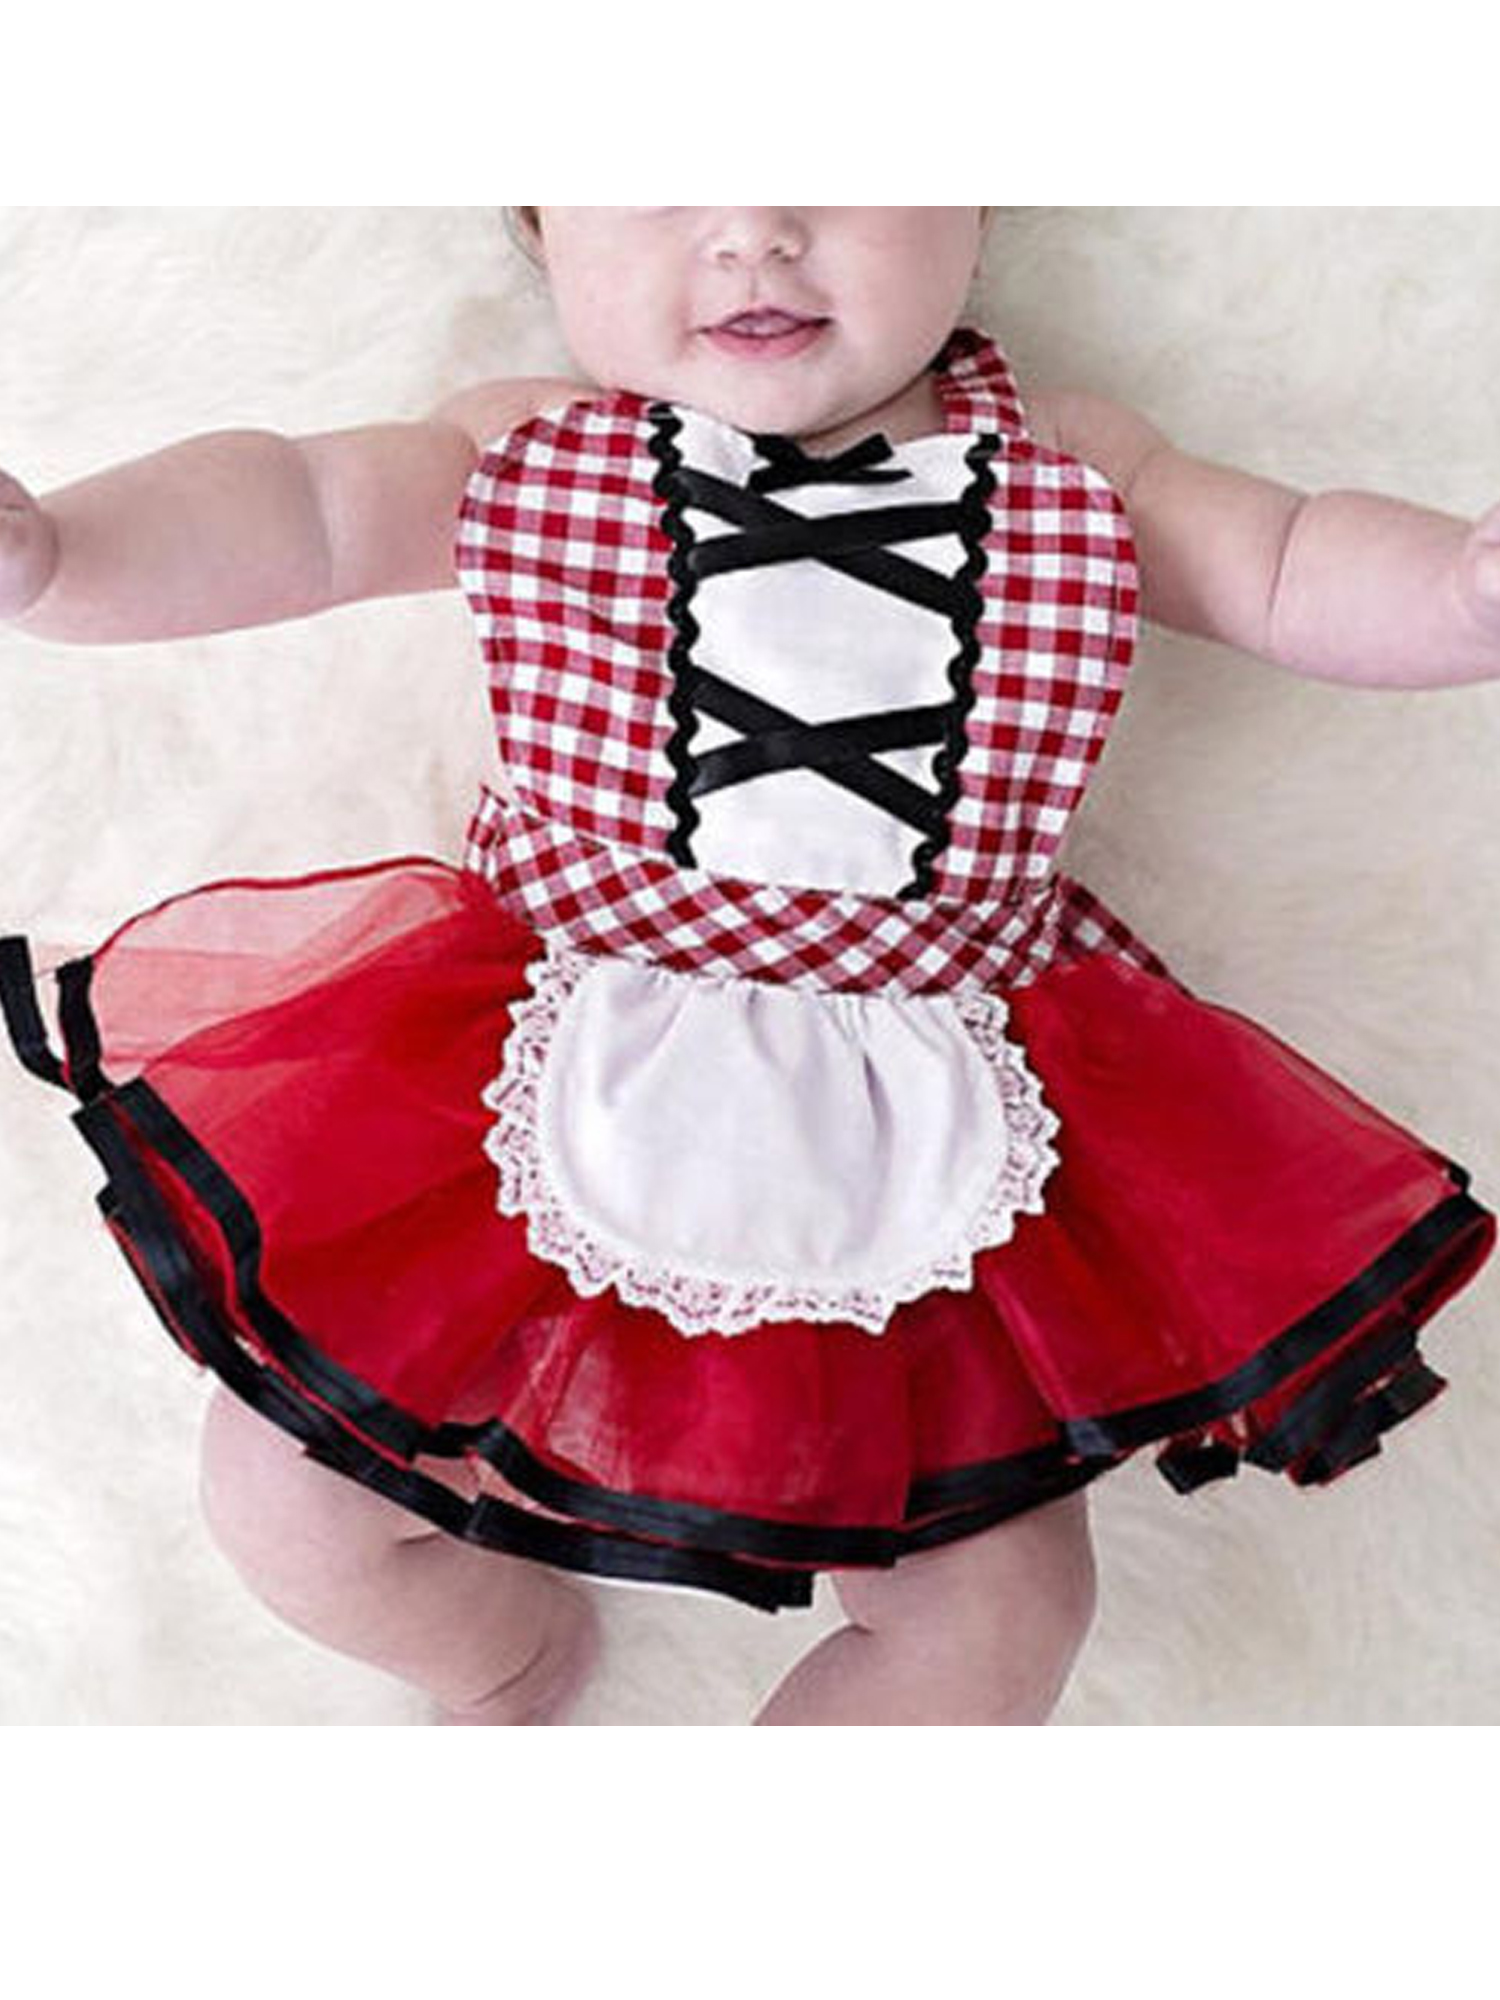 Eyicmarn Cosplay Little Red Riding Hood Garment for Babies with Cape - image 5 of 6